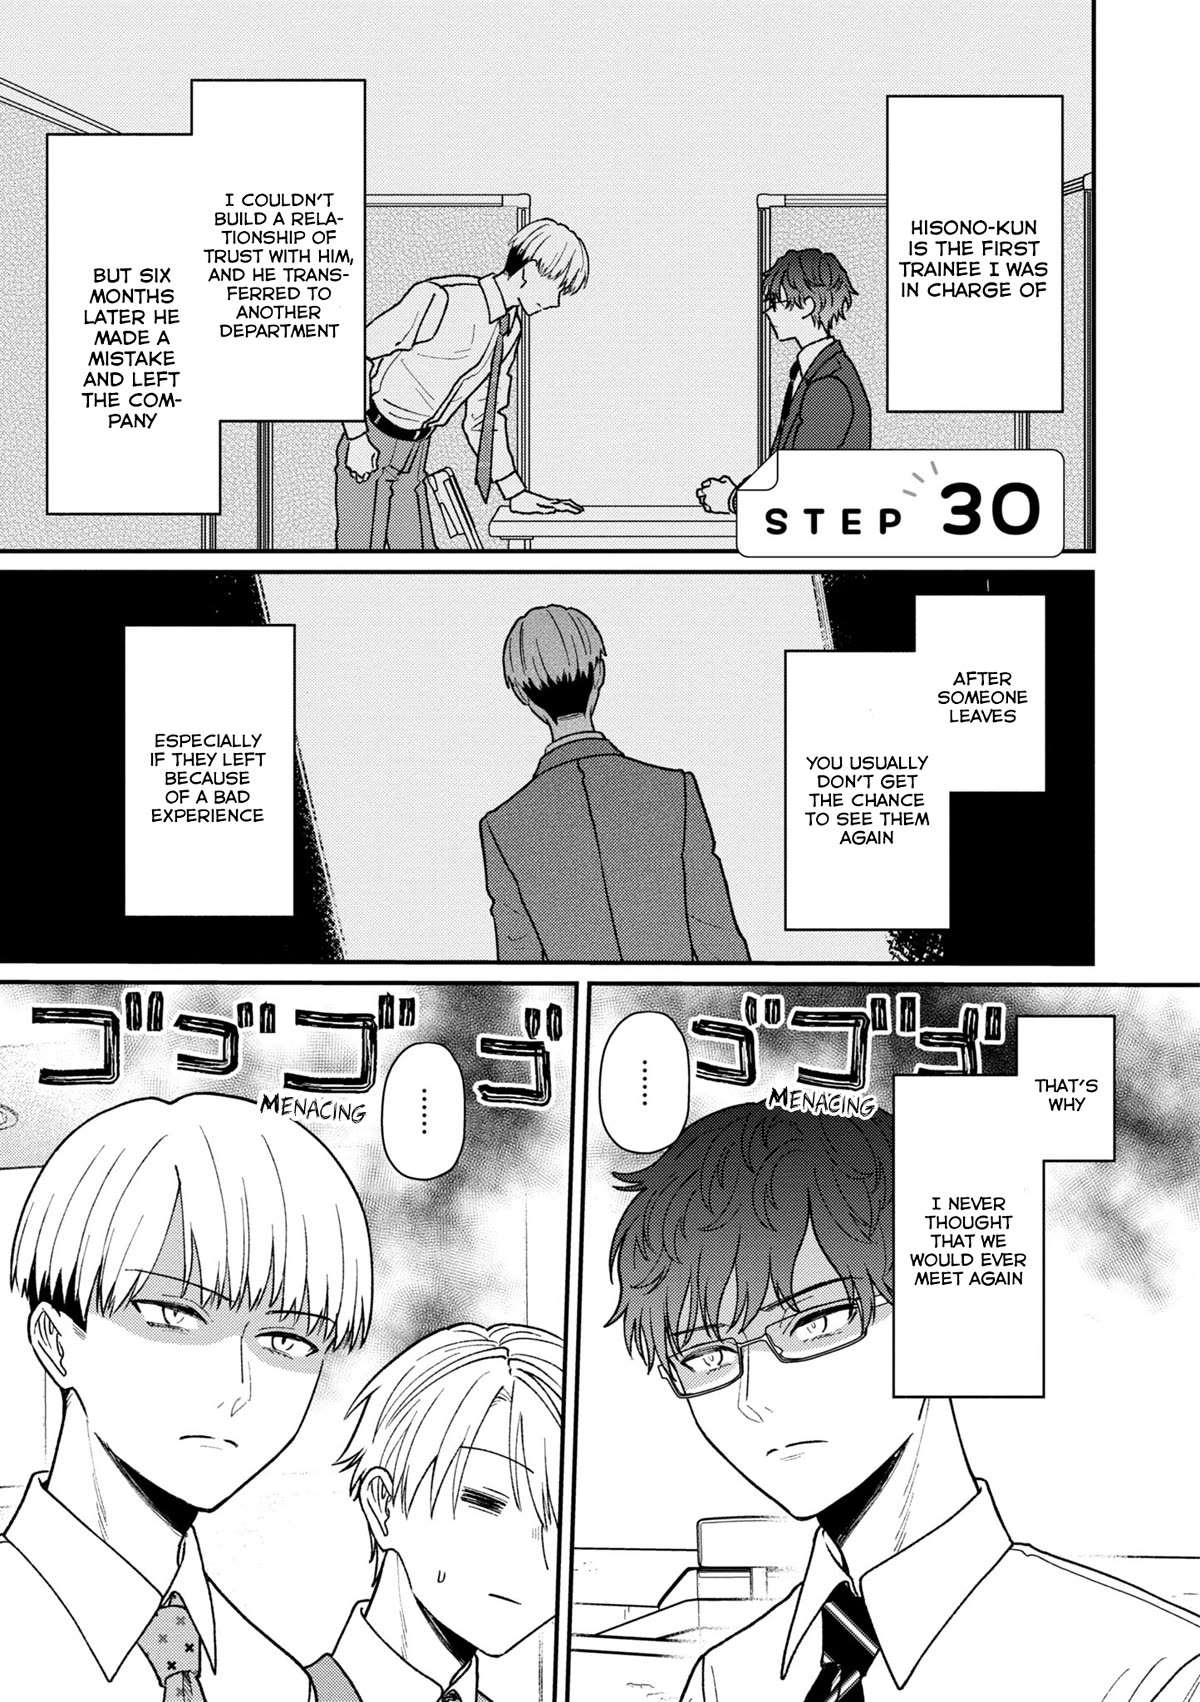 The New-Hire Who Could "Read" Emotions and the Unsociable Senpai - chapter 30 - #2